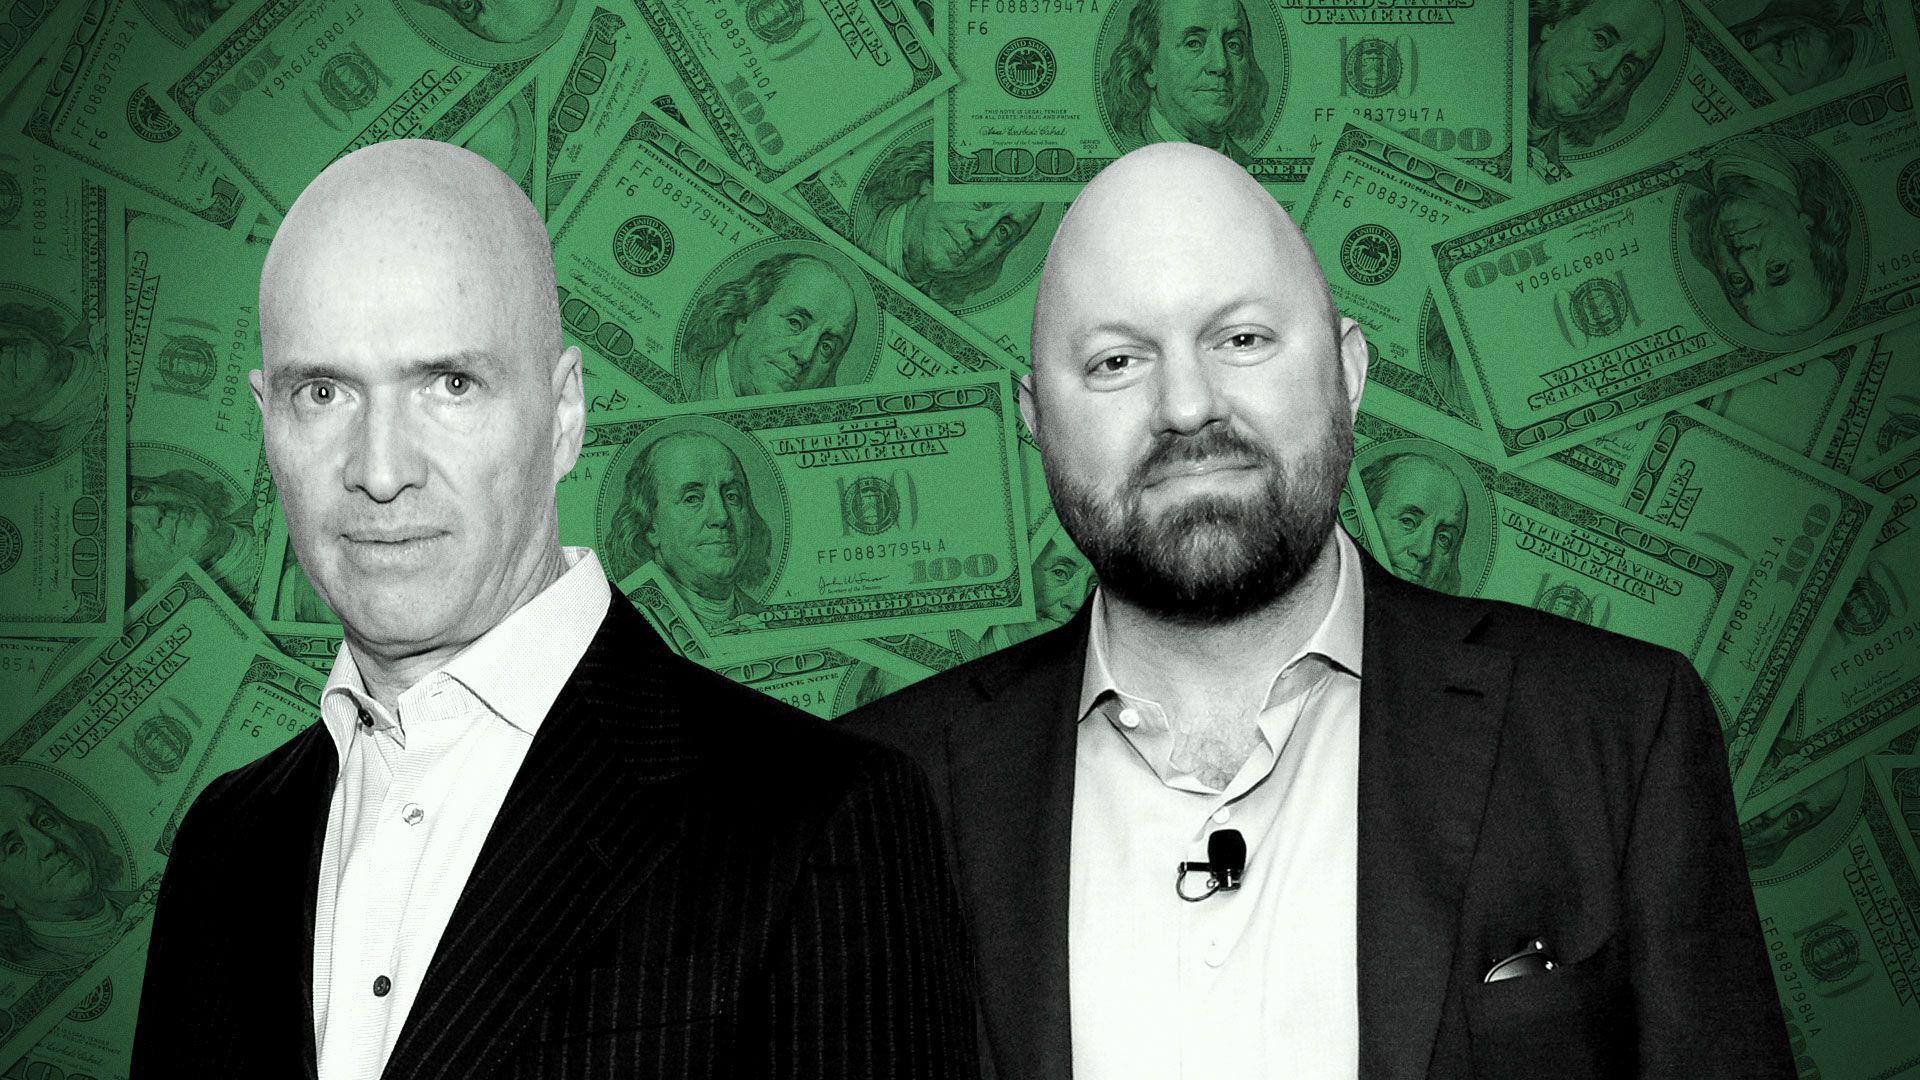 Photo illustration of Ben Horowitz and Marc Andreessen on a background of money